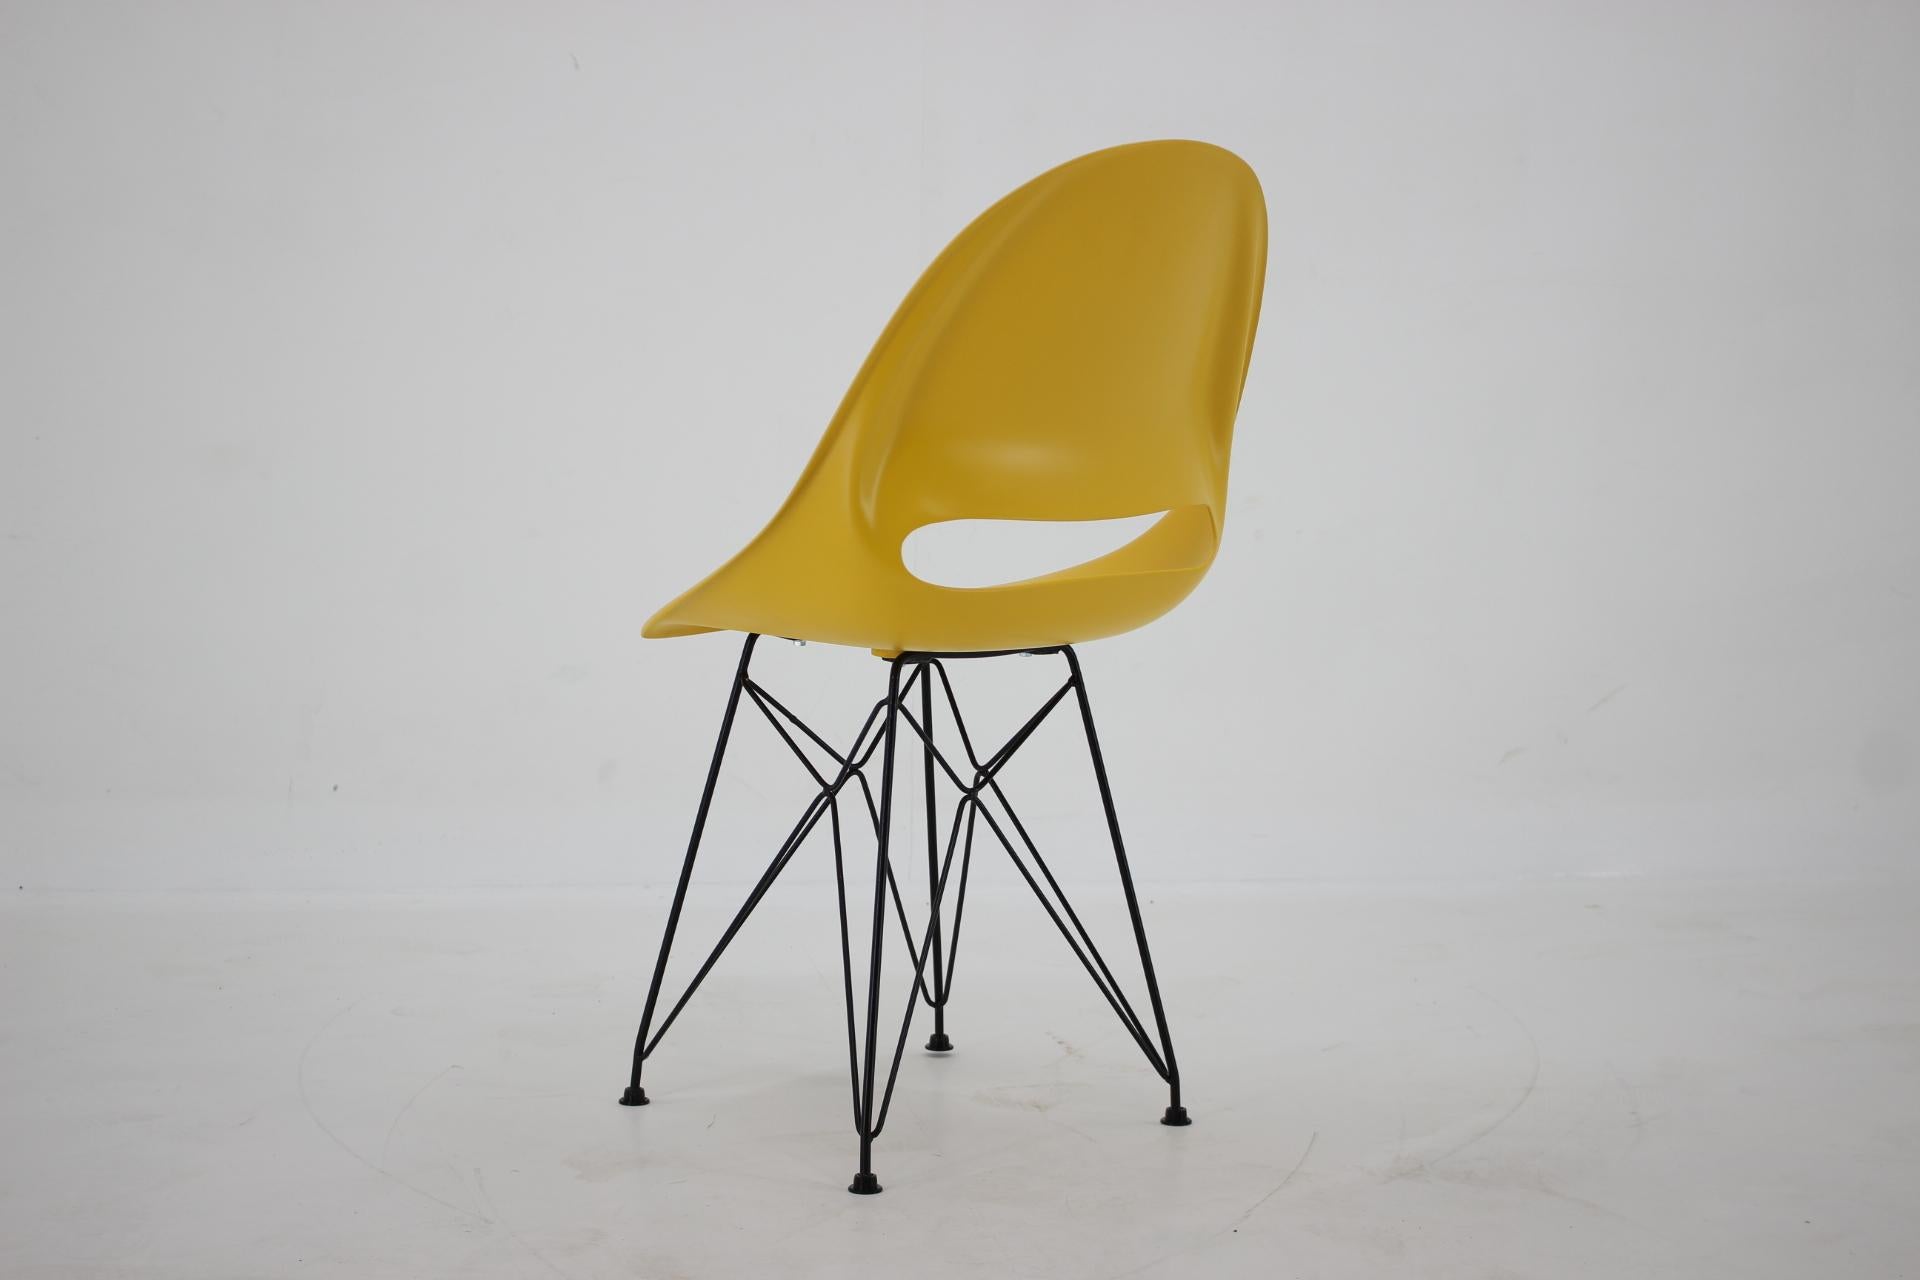 Set of 4 Midcentury Yellow Design Fiberglass Dining Chairs by M.Navratil, 1960s For Sale 5